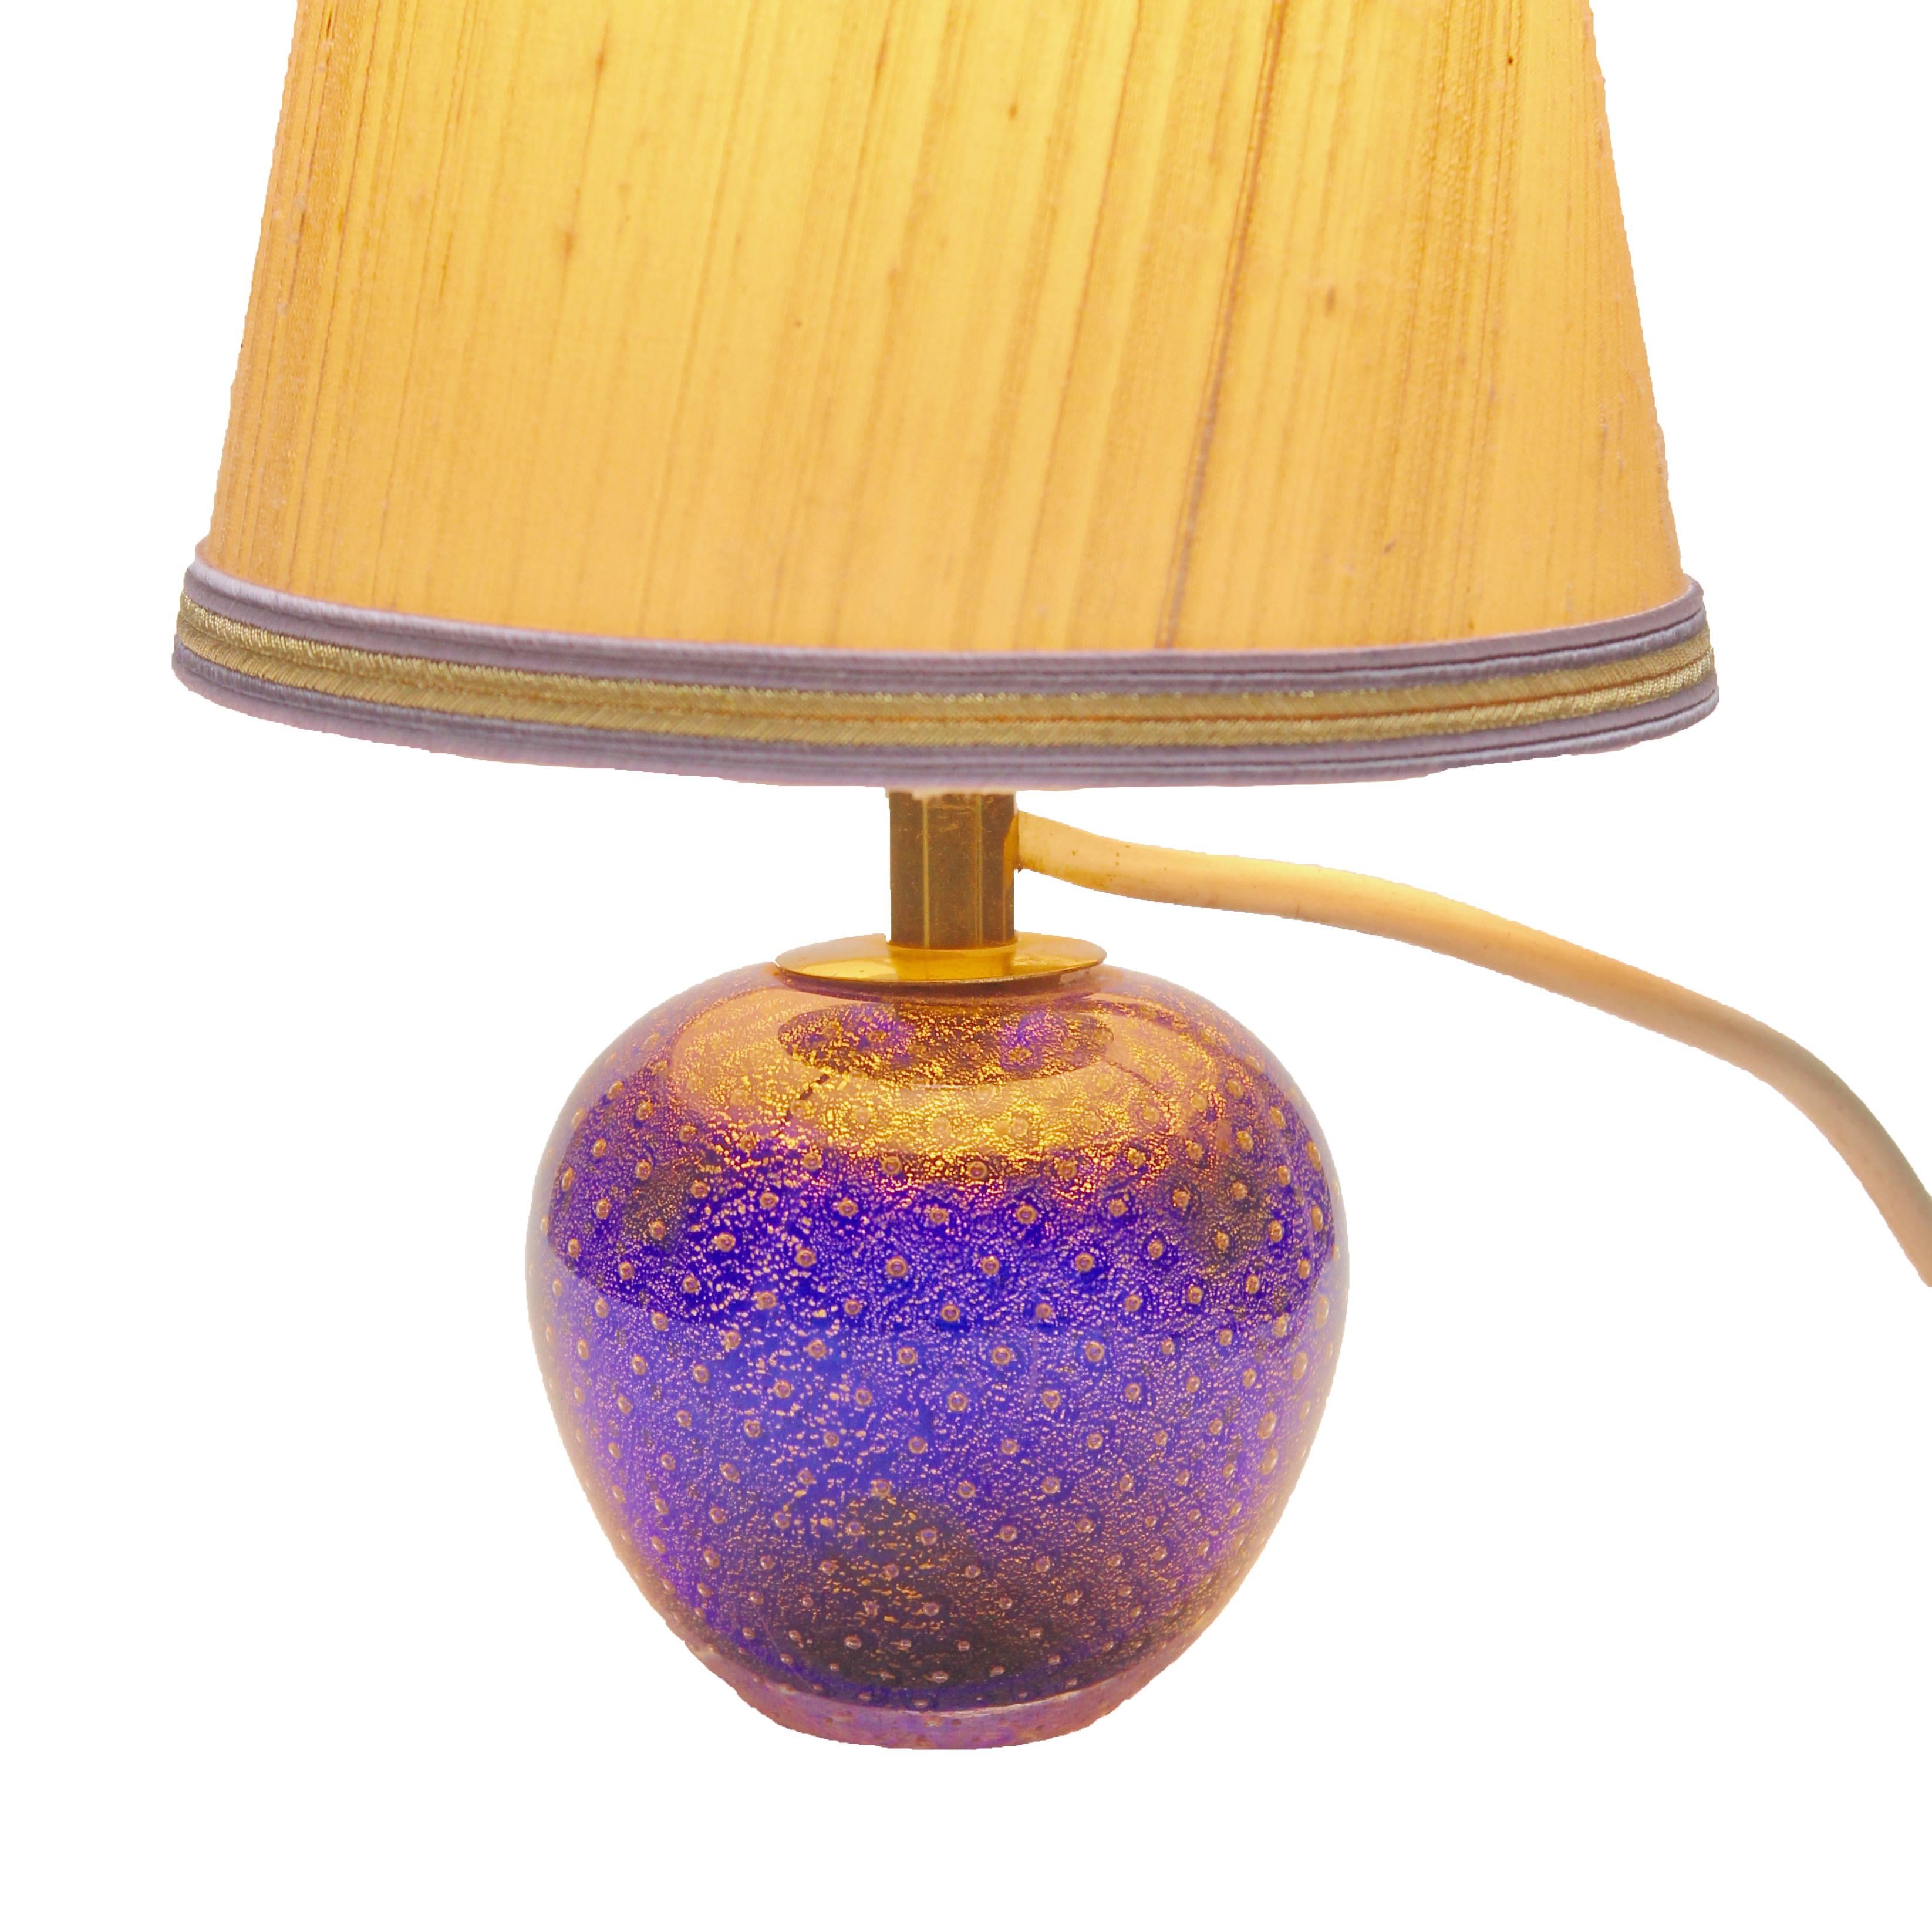 Vintage Murano globe-shaped lamp made in cobalt blue with aventurine (gold metal) and bullicante decor (finely controlled bubbles). Ideal for a bedside or side table, when lit it gives a dramatic jewel-like effect This solid lamp base, complete with